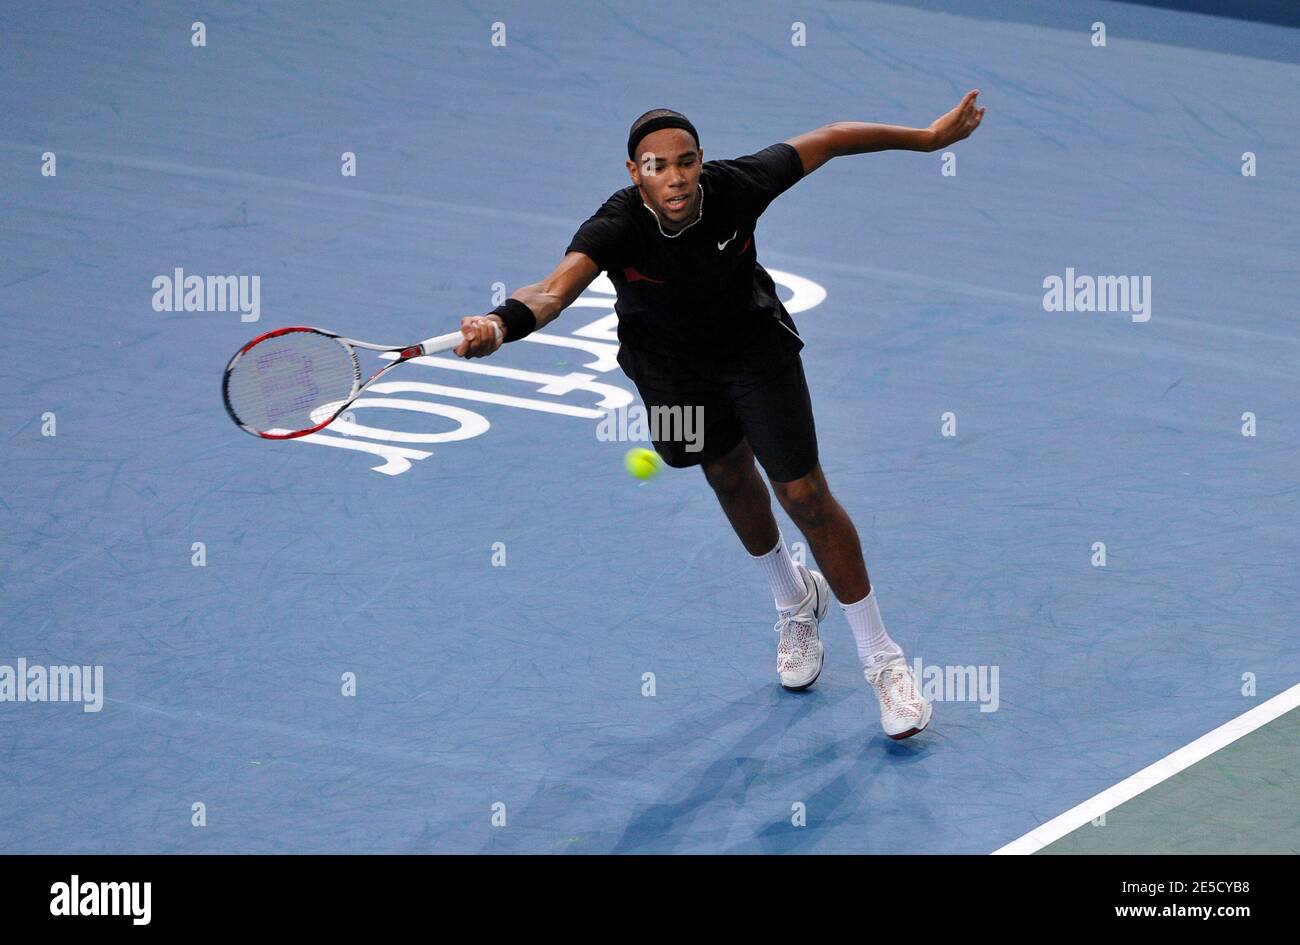 France's Josselin Ouanna is defeated by Sweden's Robin Soderling, 6-3, 6-4,  in their second round of the BNP Paris Masters indoor tennis tournament at  the Palais Omnisports Paris-Bercy in Paris, France on